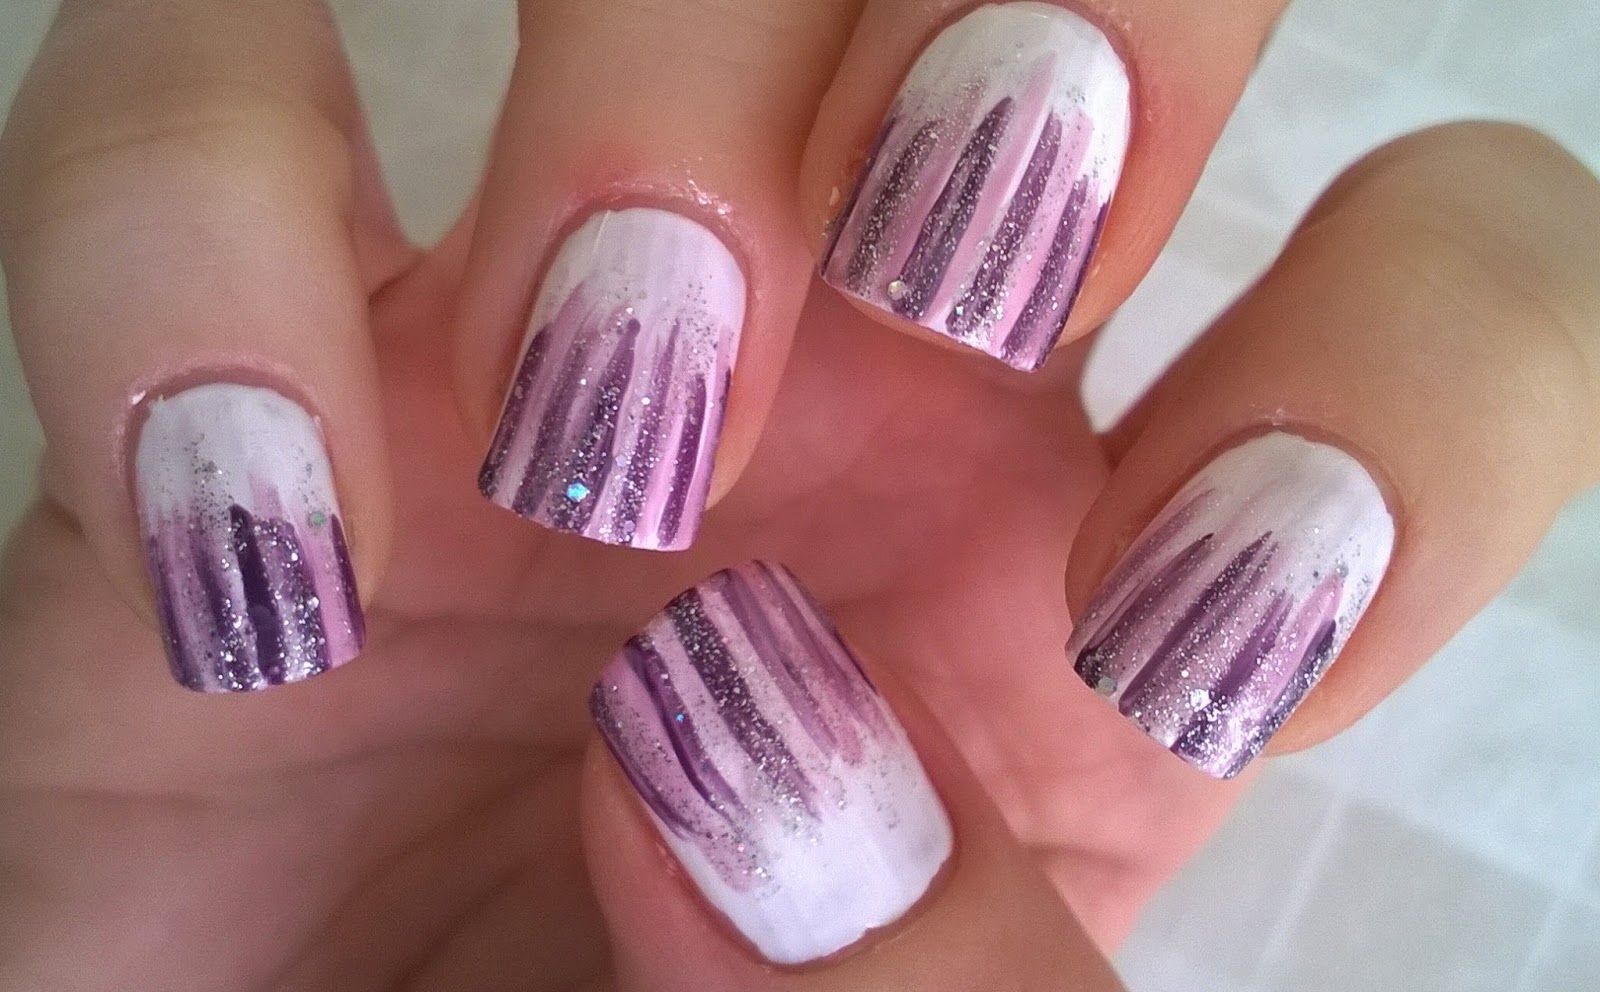 5. Pink and Silver Glitter Striped Nail Design - wide 5